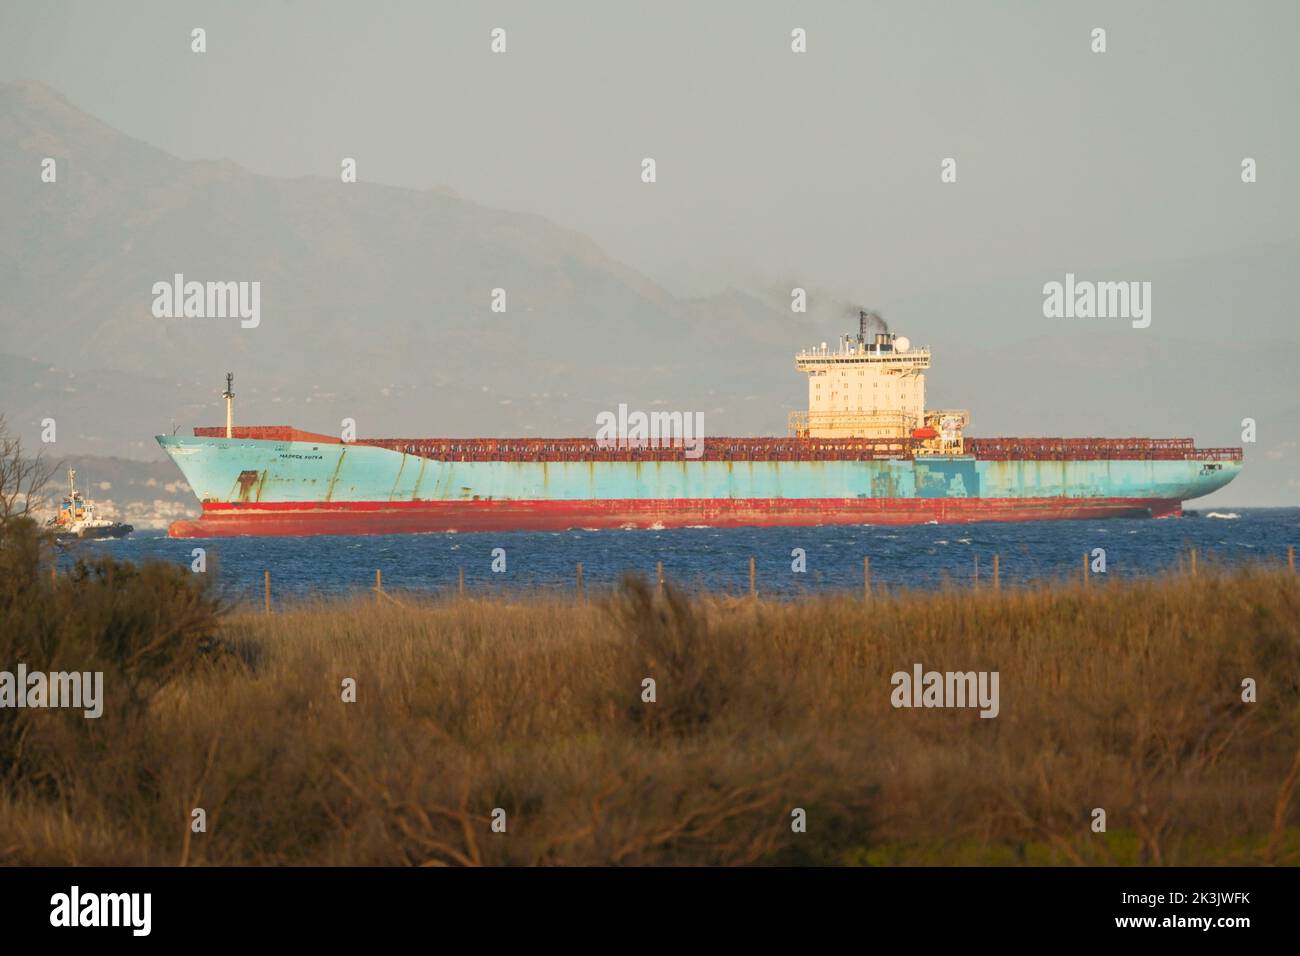 Container ship MAERSK KOTKA, near Malaga, with Guadalhorce natural park in front, Andalucia, Spain. Stock Photo